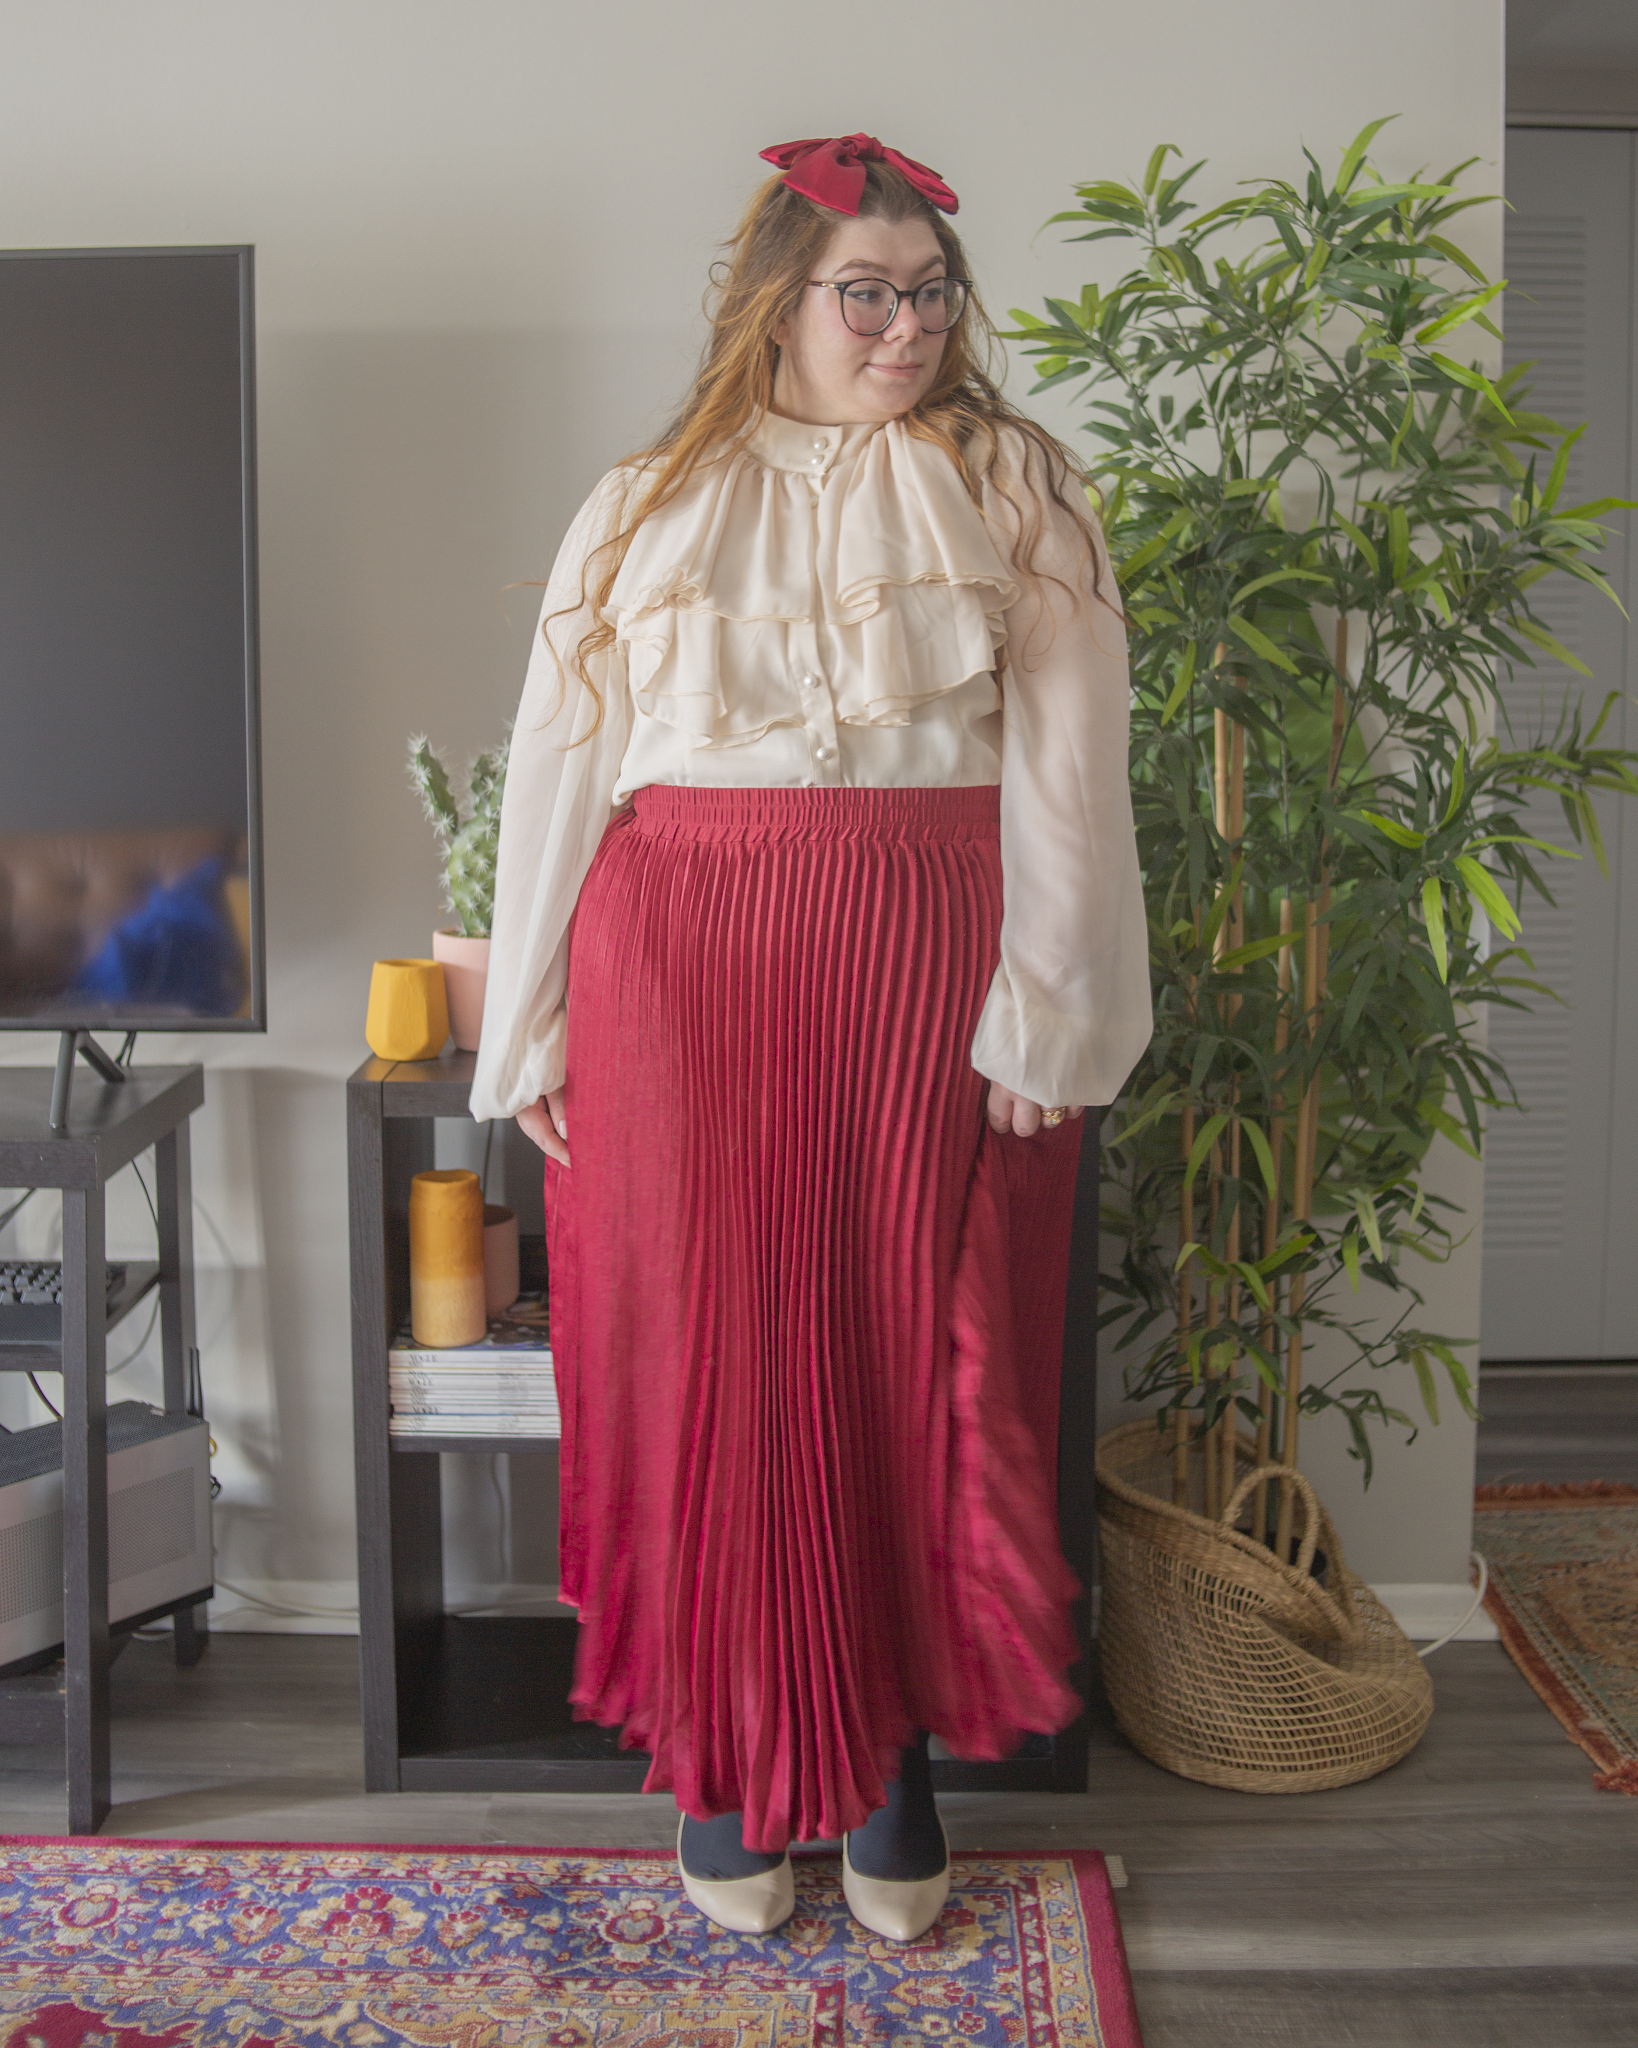 An outfit consisting of a white high neck sheer bishop sleeve blouse with Edwardian inspired neck ruffles tucked into a wine red pleated maxi skirt, with black tights and cream slingback heels.